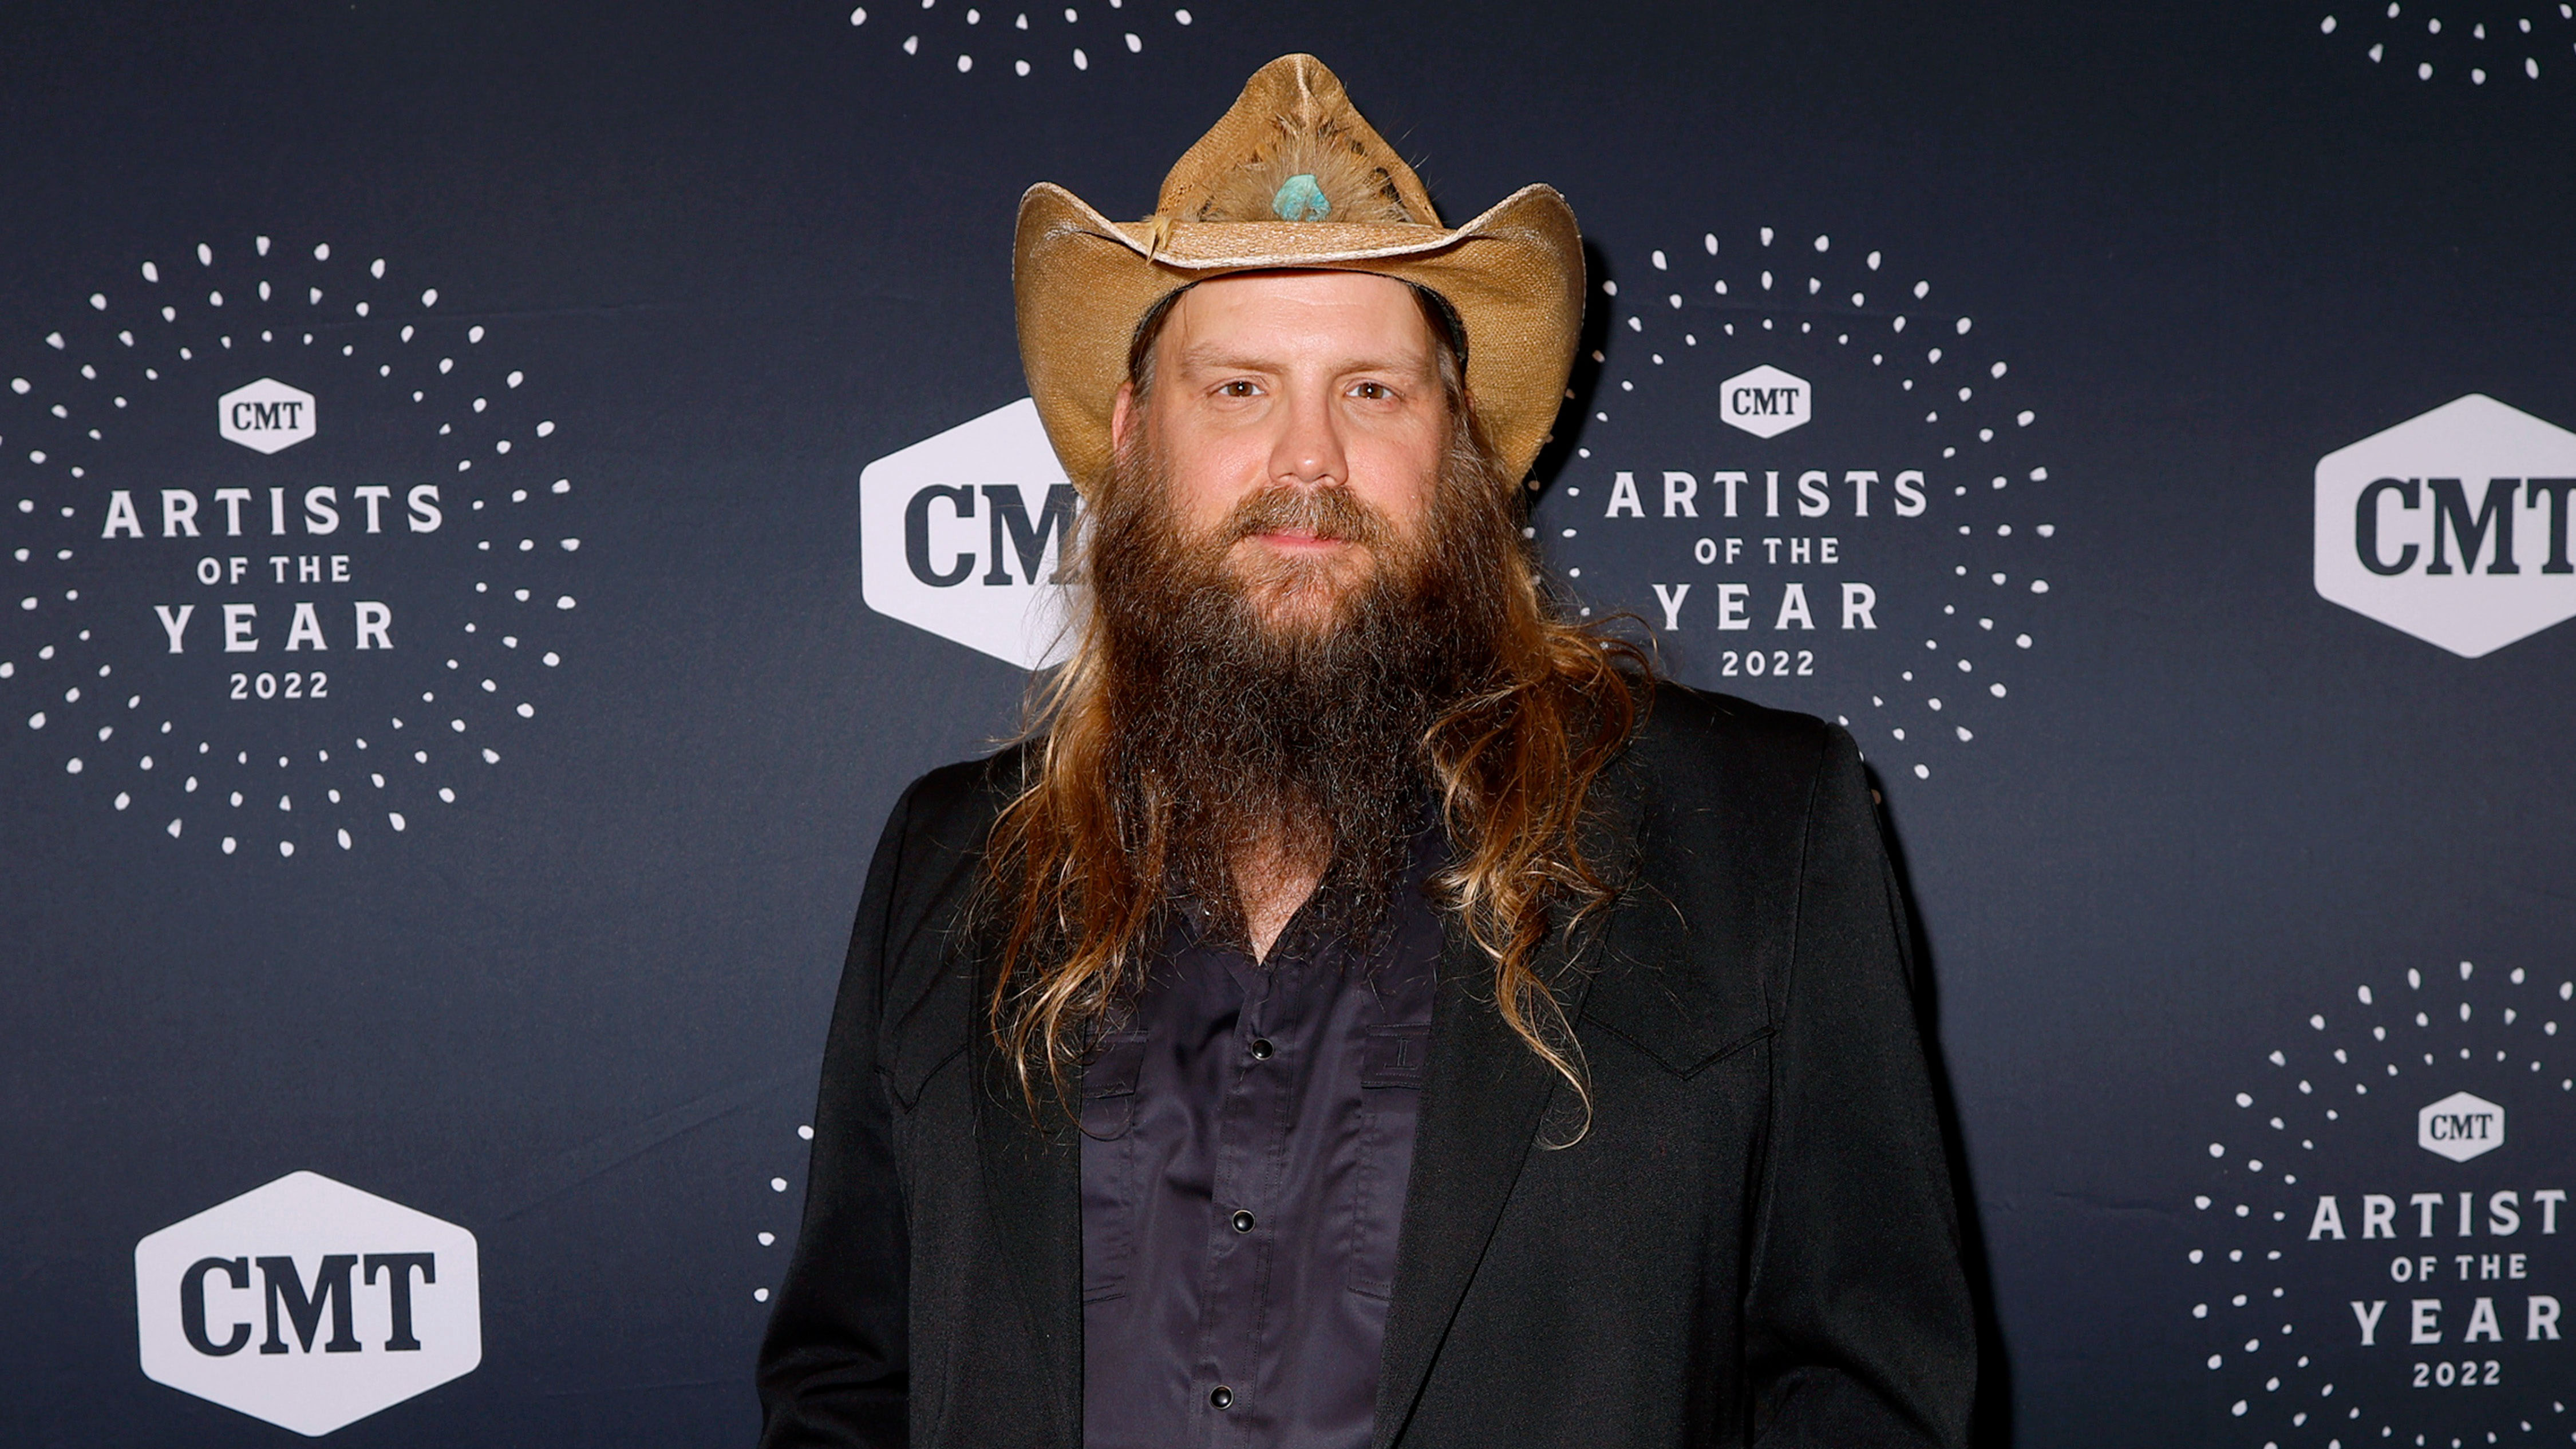 NASHVILLE, TENNESSEE - OCTOBER 12: In this photo released on October 14, 2022, Chris Stapleton attends the 2022 CMT Artists of the Year at Schermerhorn Symphony Center on October 12, 2022 in Nashville, Tennessee. (Photo by Brett Carlsen/Getty Images for CMT)